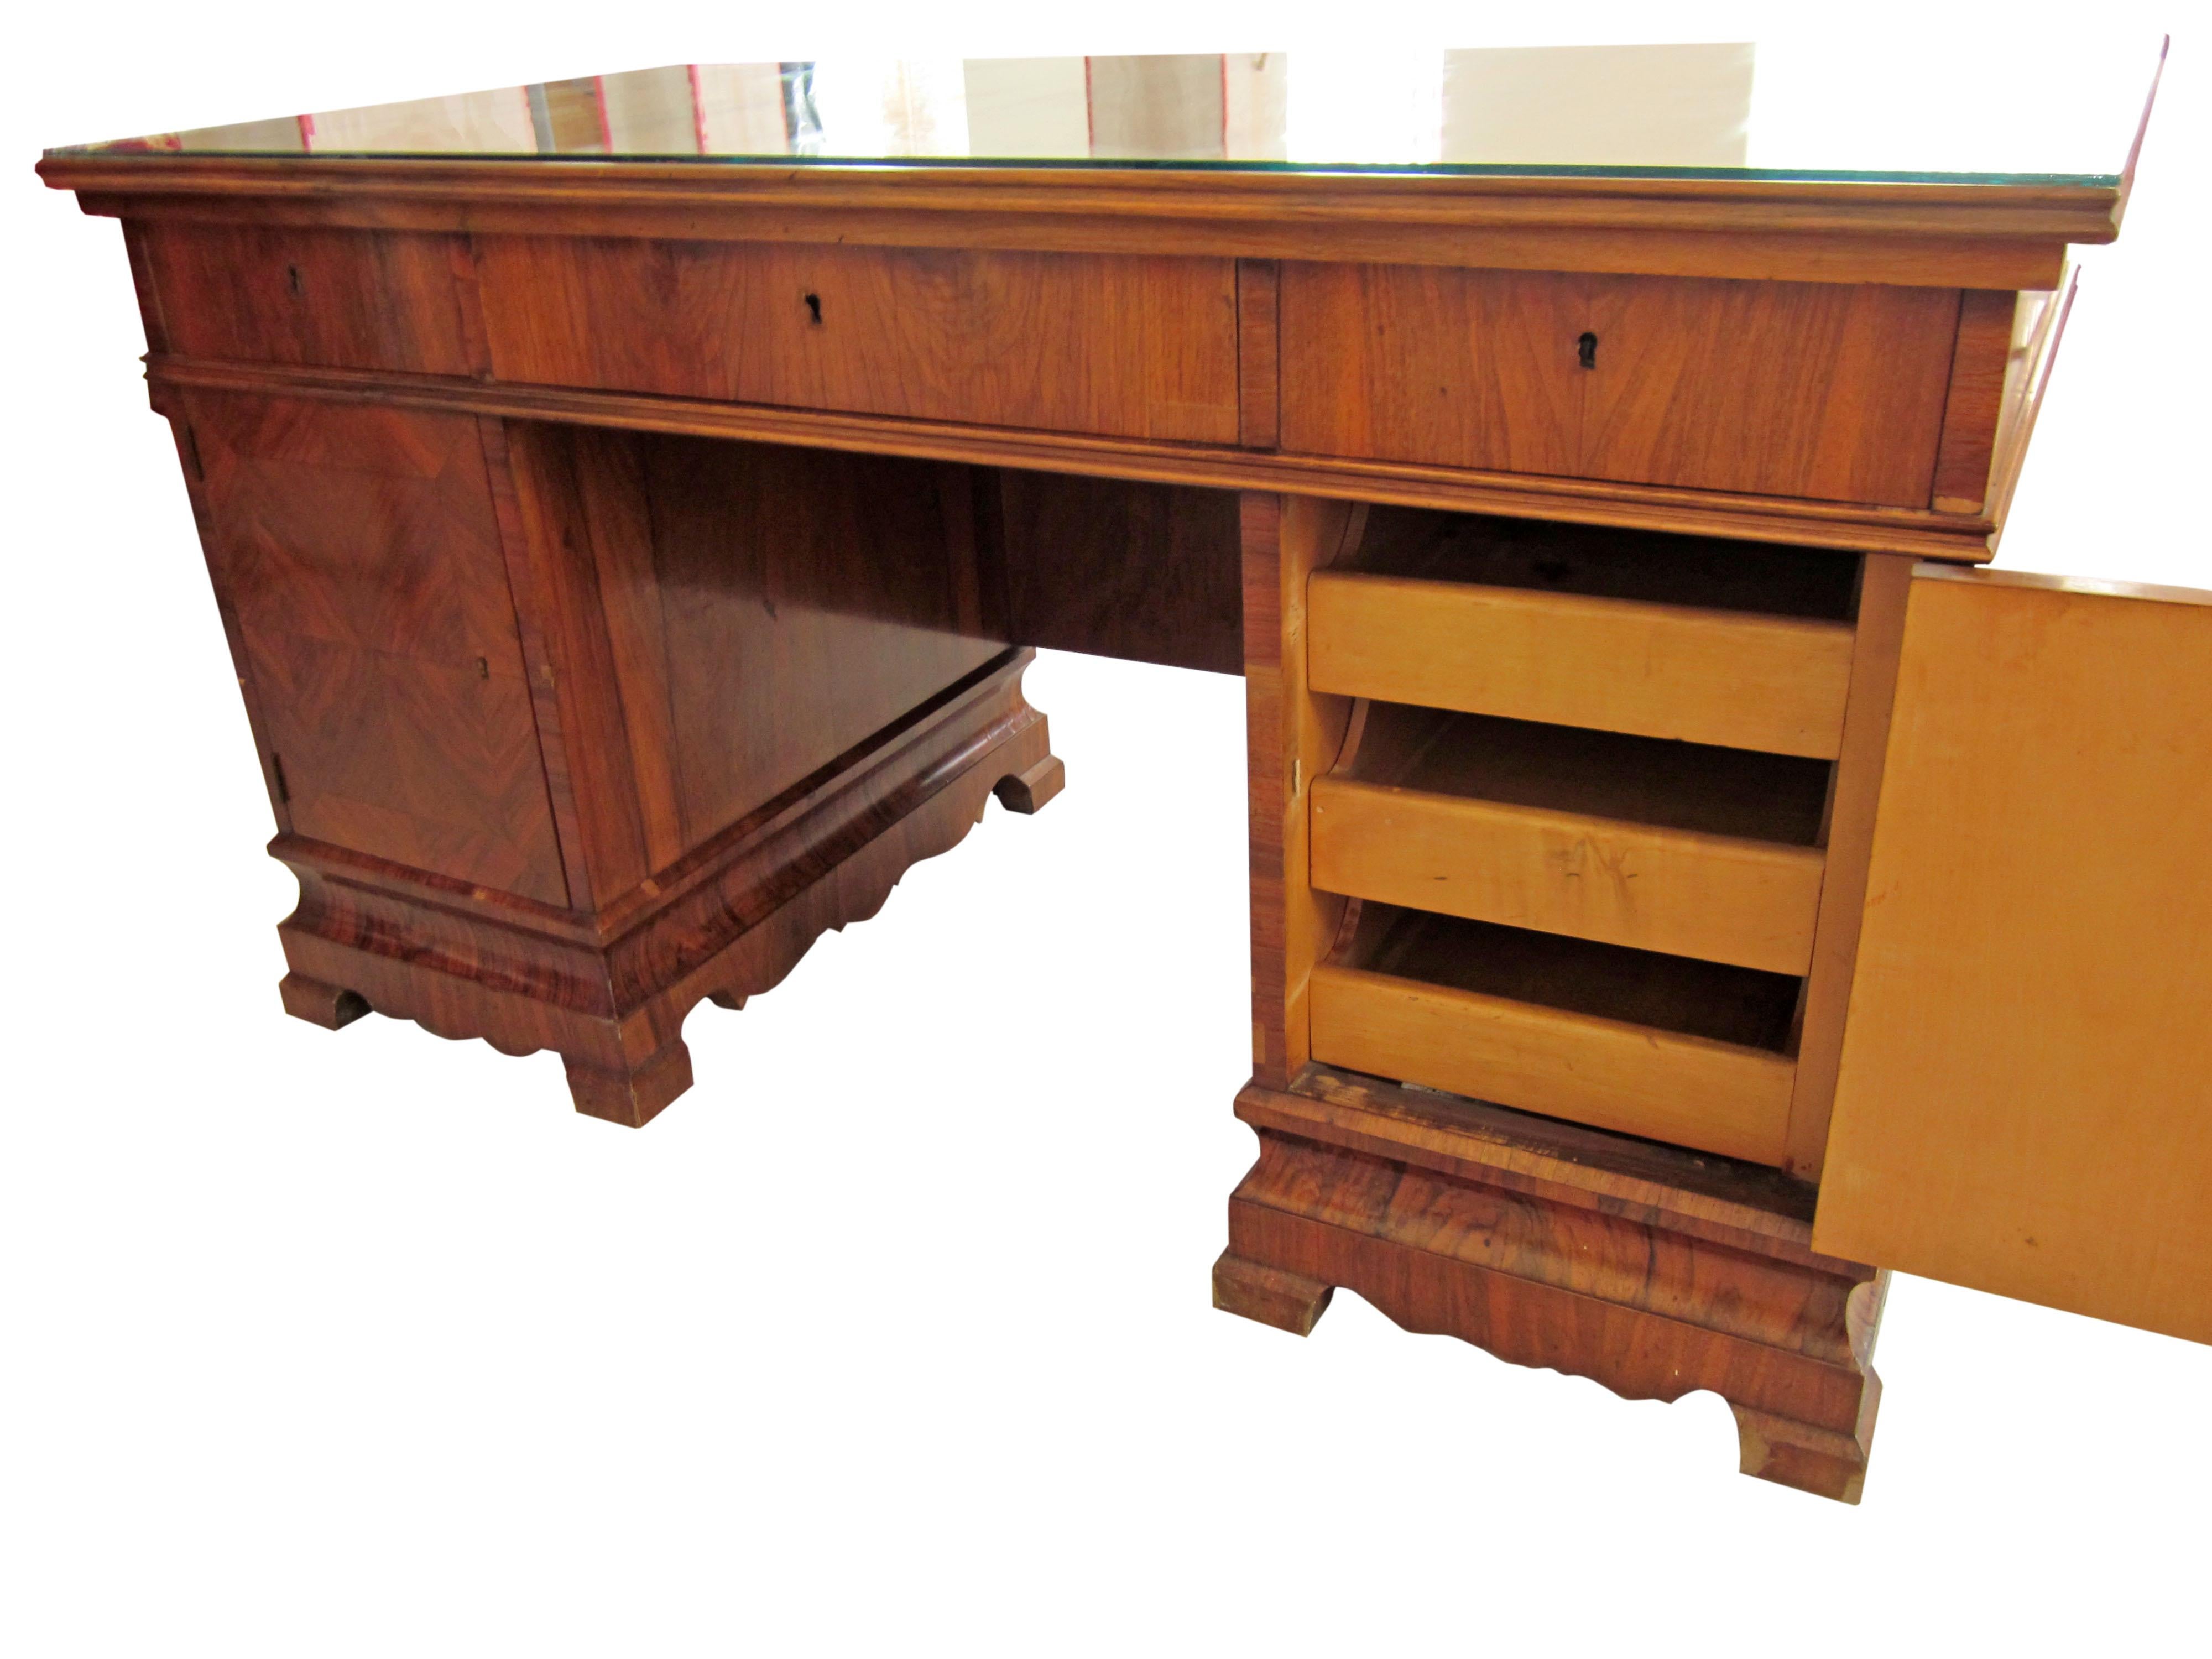 Austrian Late 19th Century Office Furniture Set - 1 Writing Desk, 1 Table, 3 Armchairs For Sale